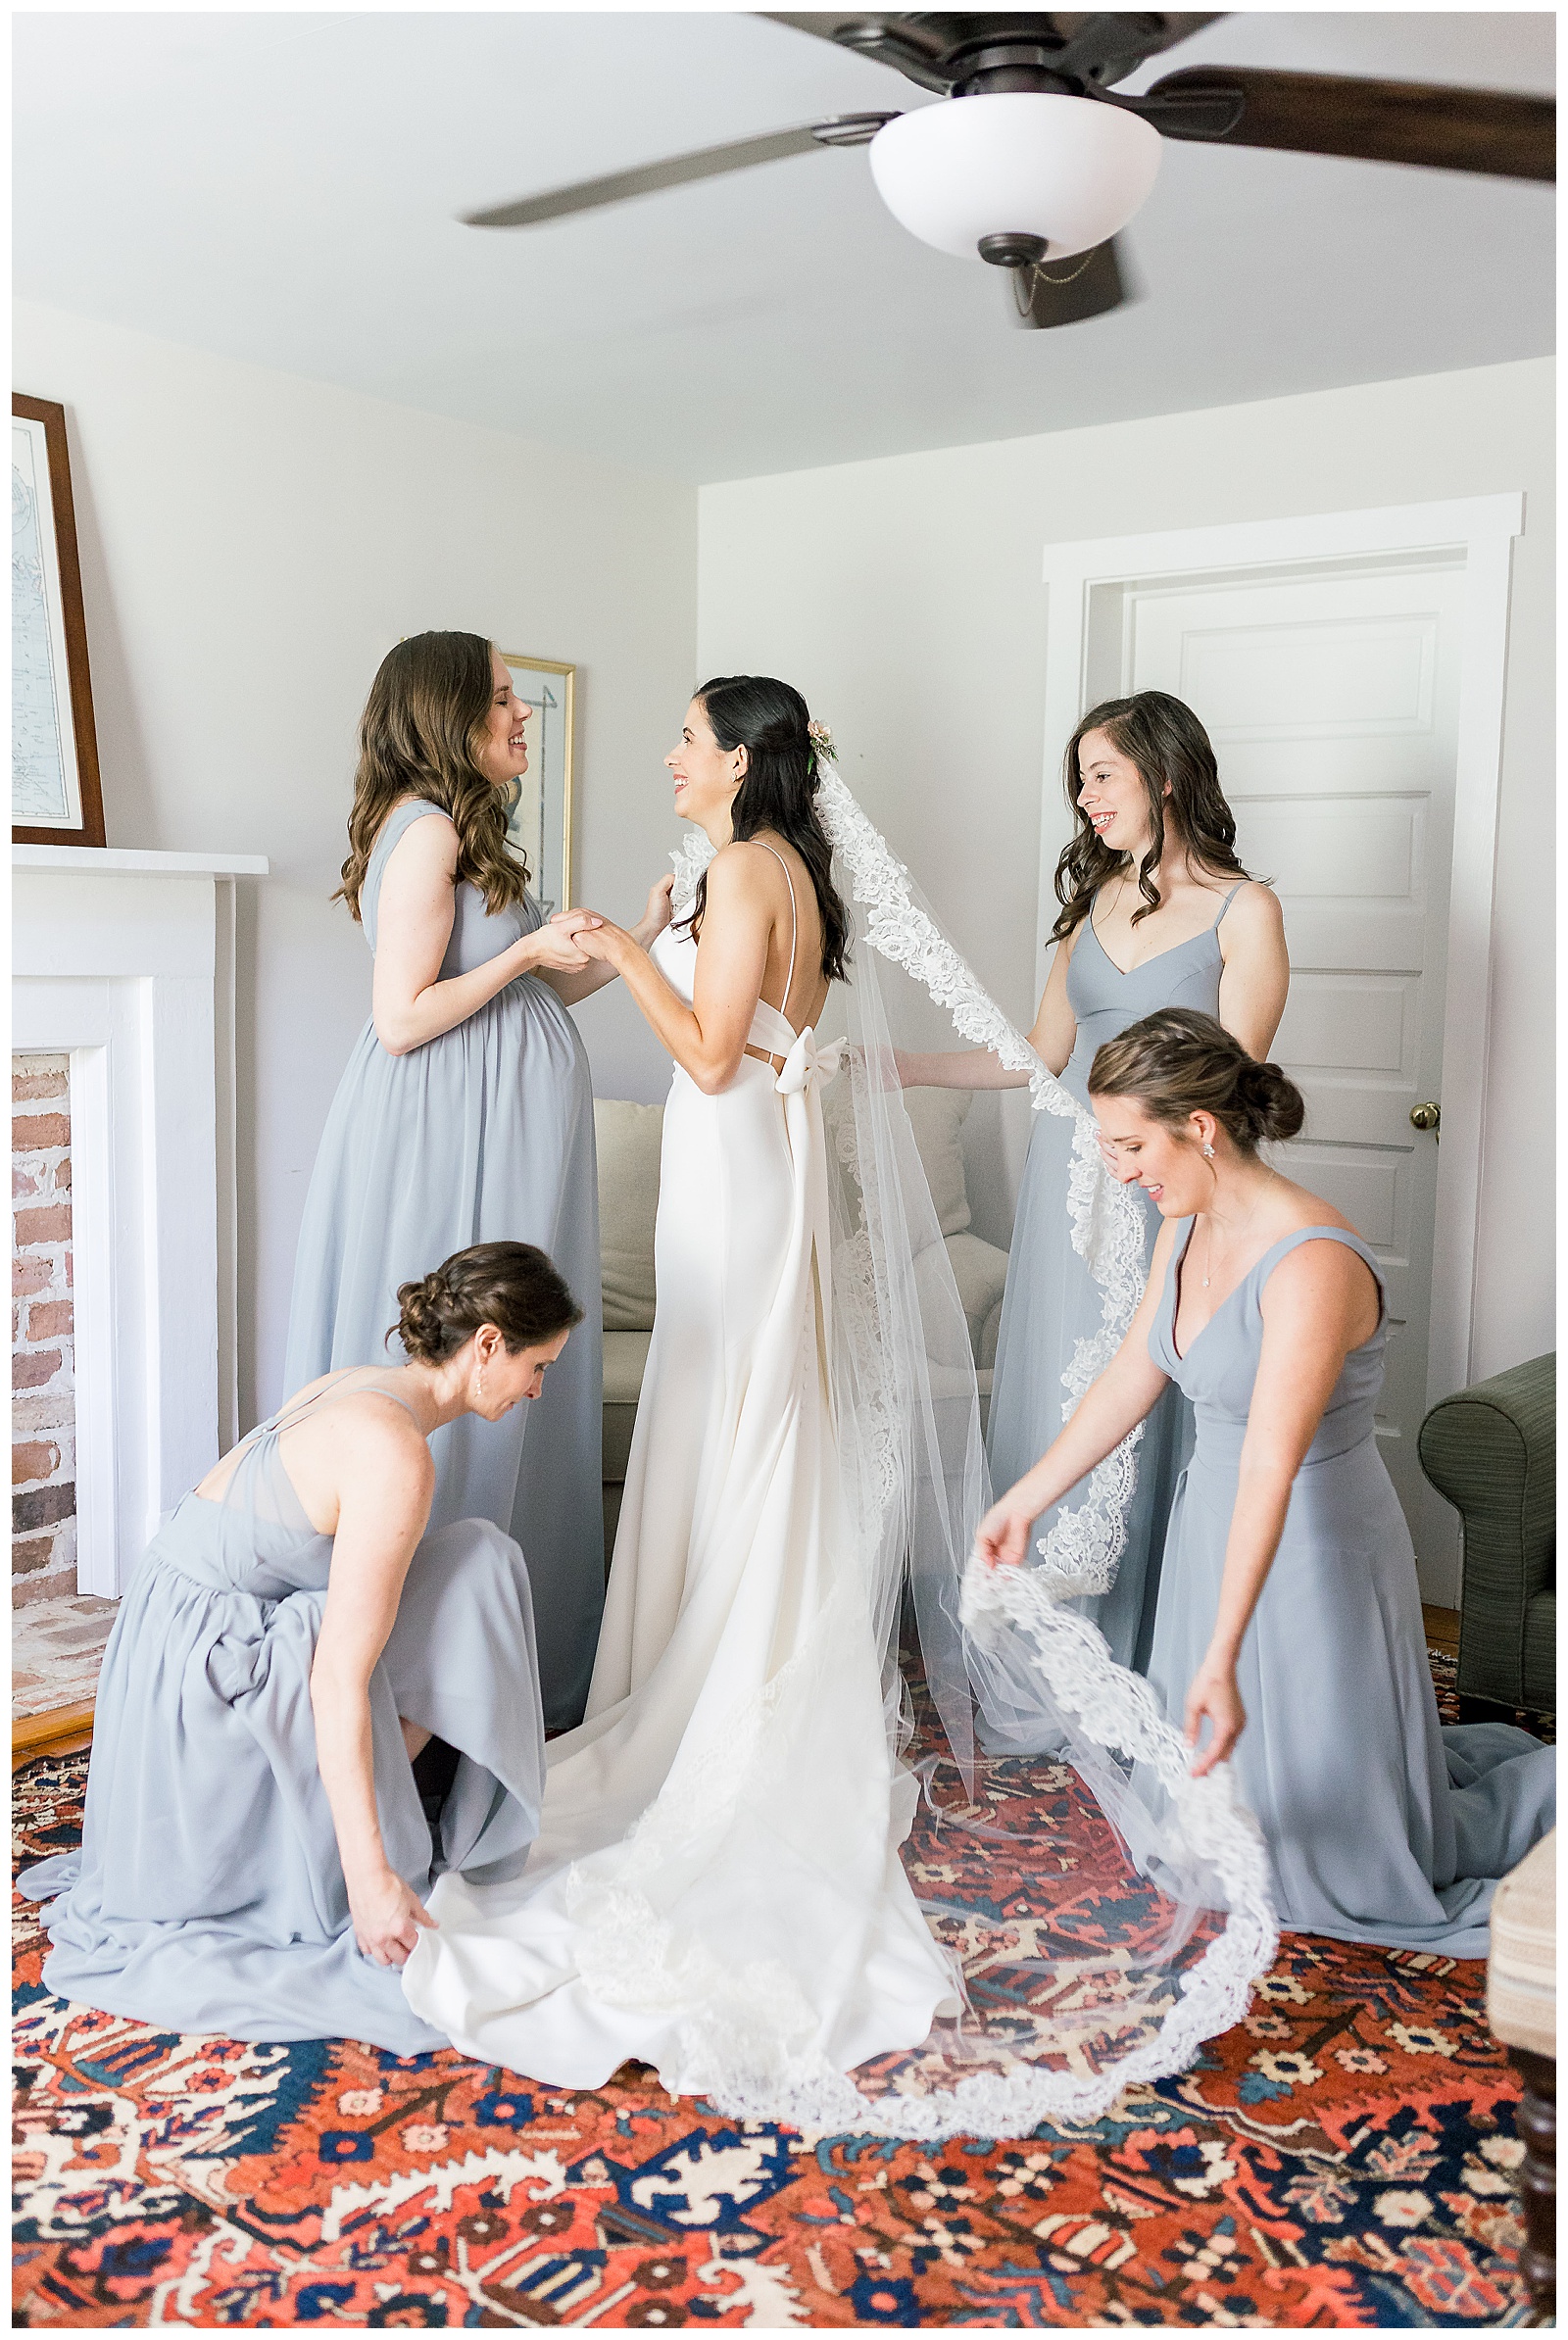 bride and bridesmaids getting ready
